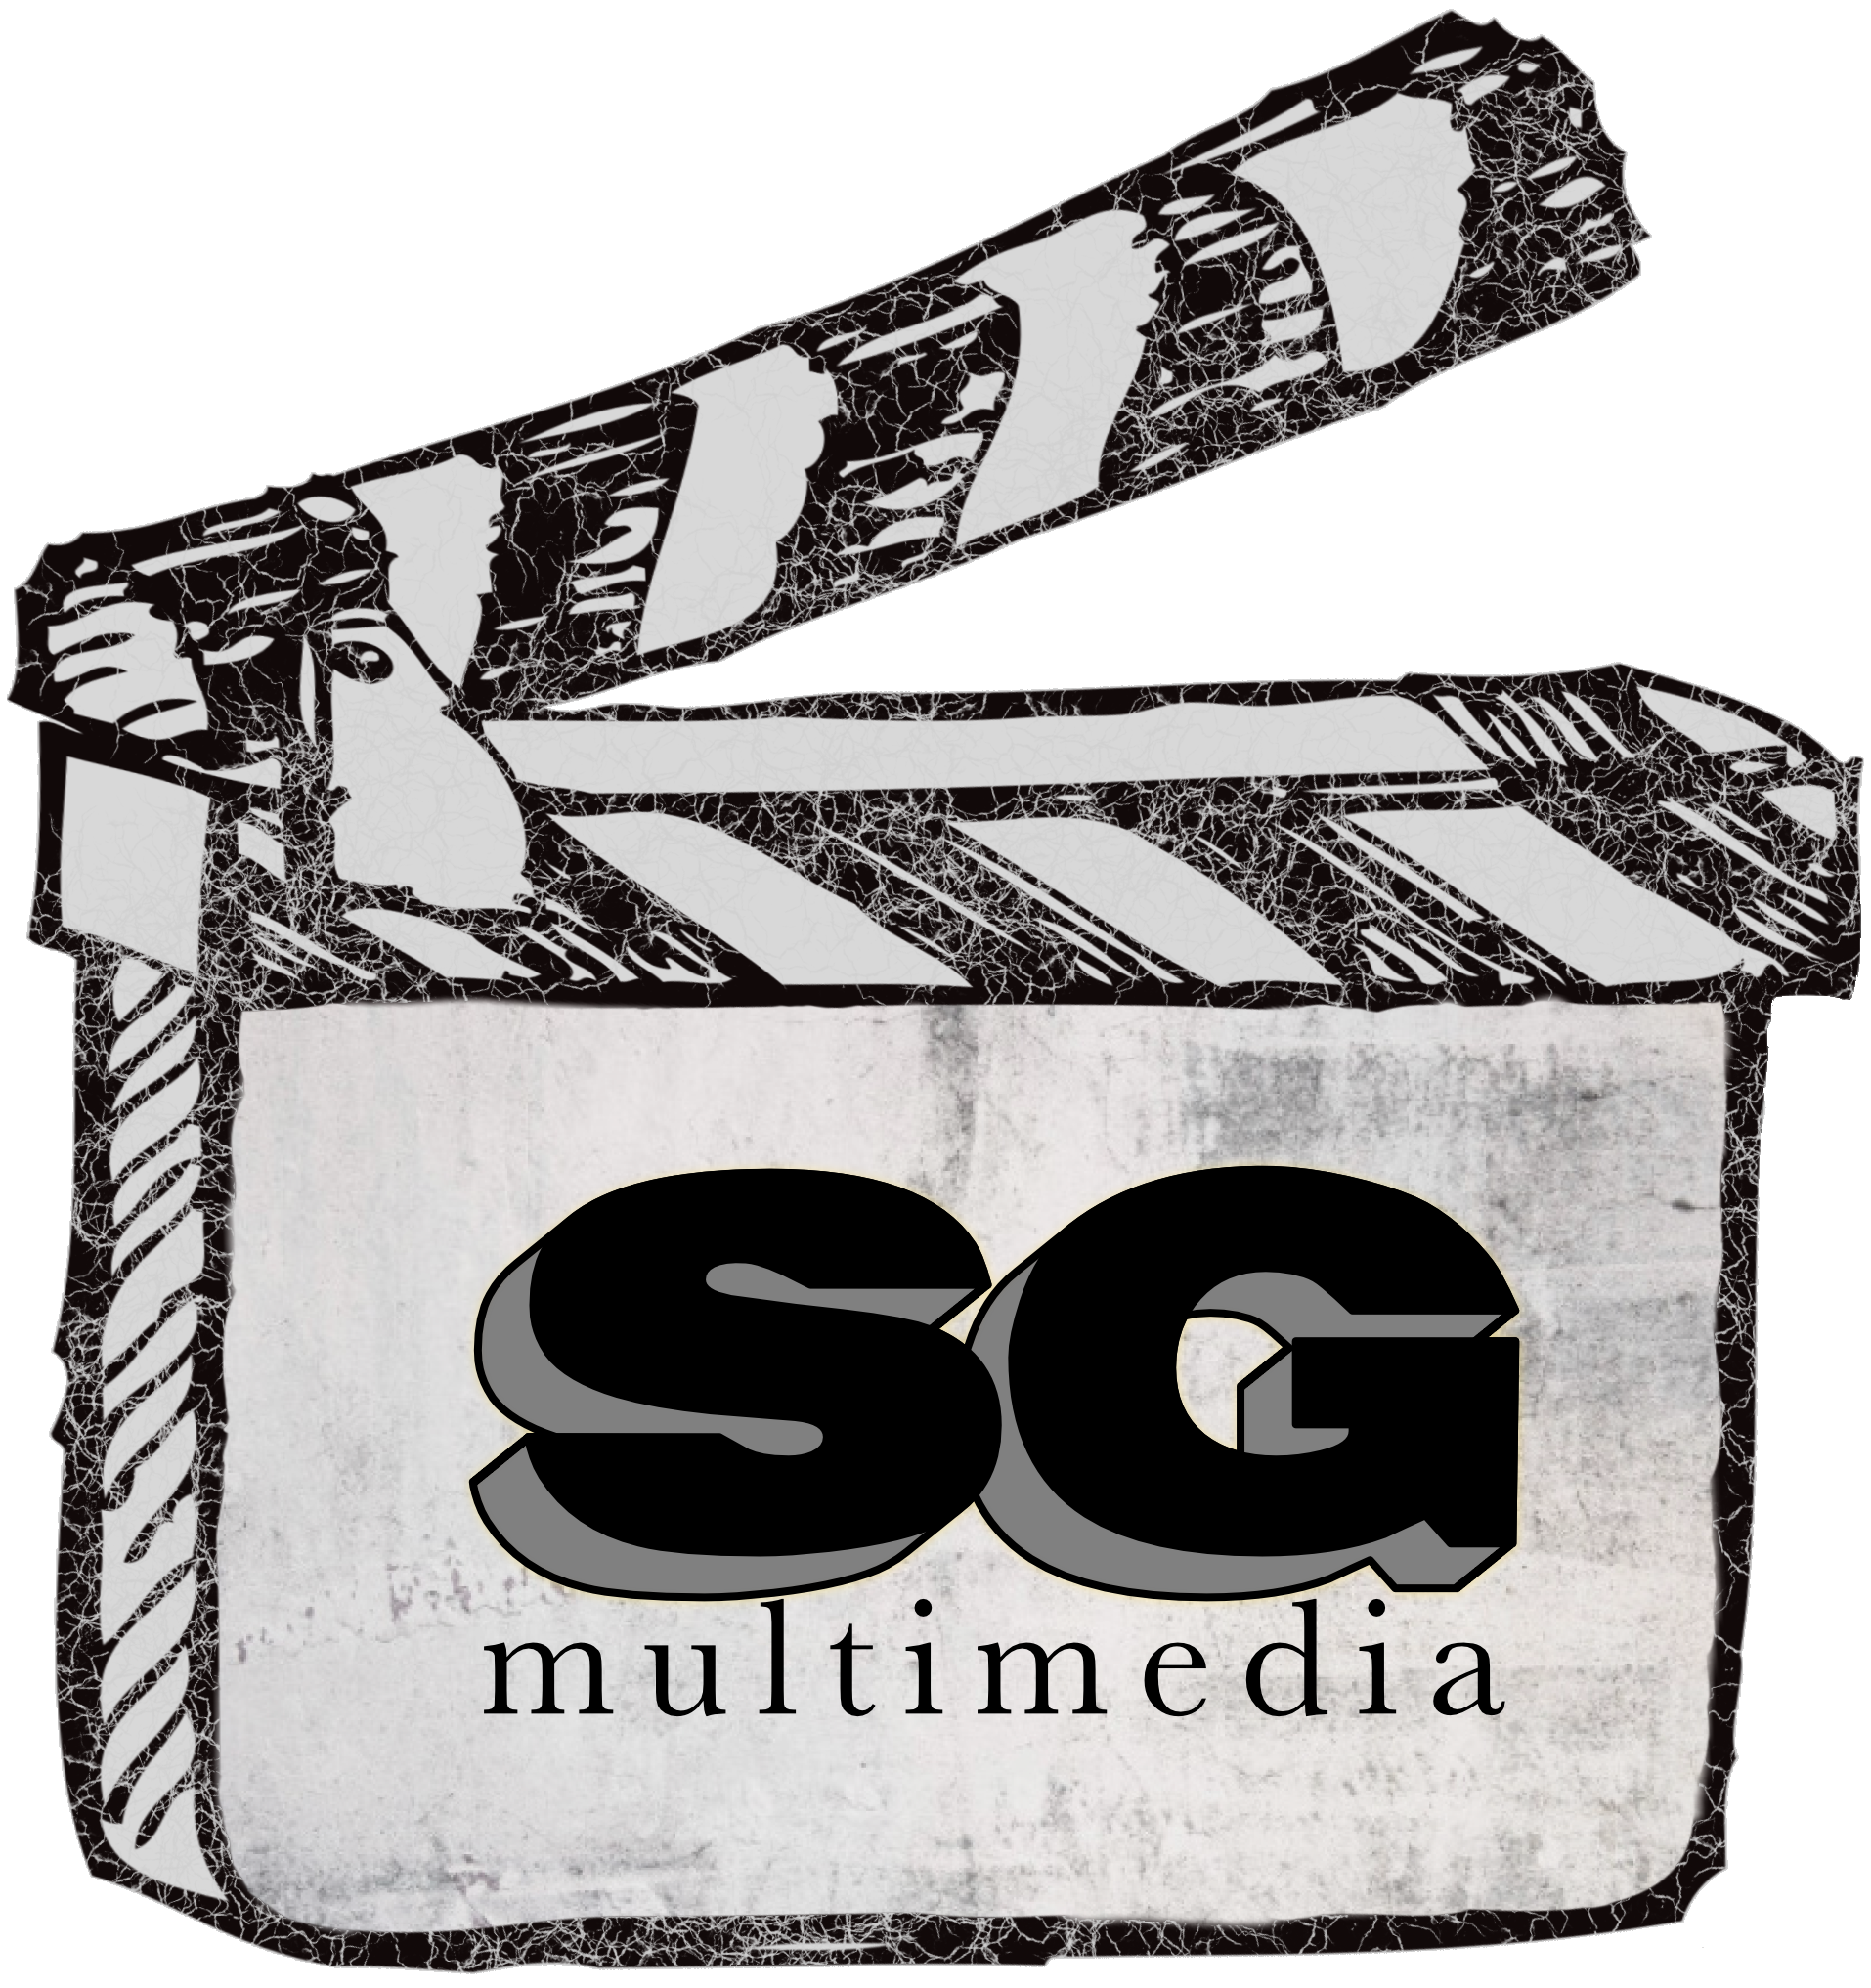 SG multimedia - the world of film, photography and multimedia in Denmark